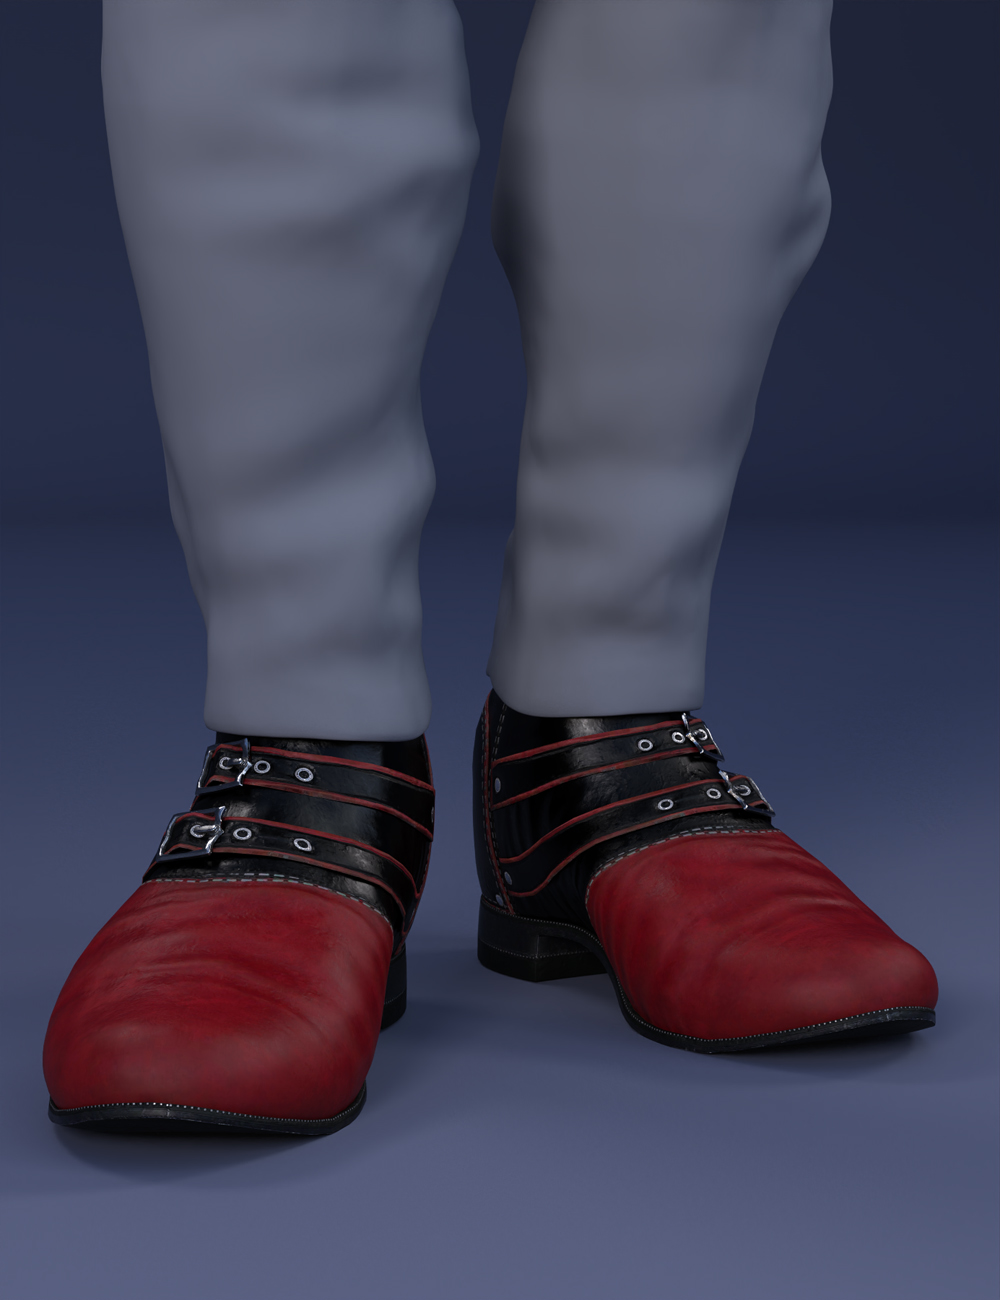 Shadow Realm Boots for Genesis 8 and 8.1 Males by: Barbara BrundonUmblefugly, 3D Models by Daz 3D